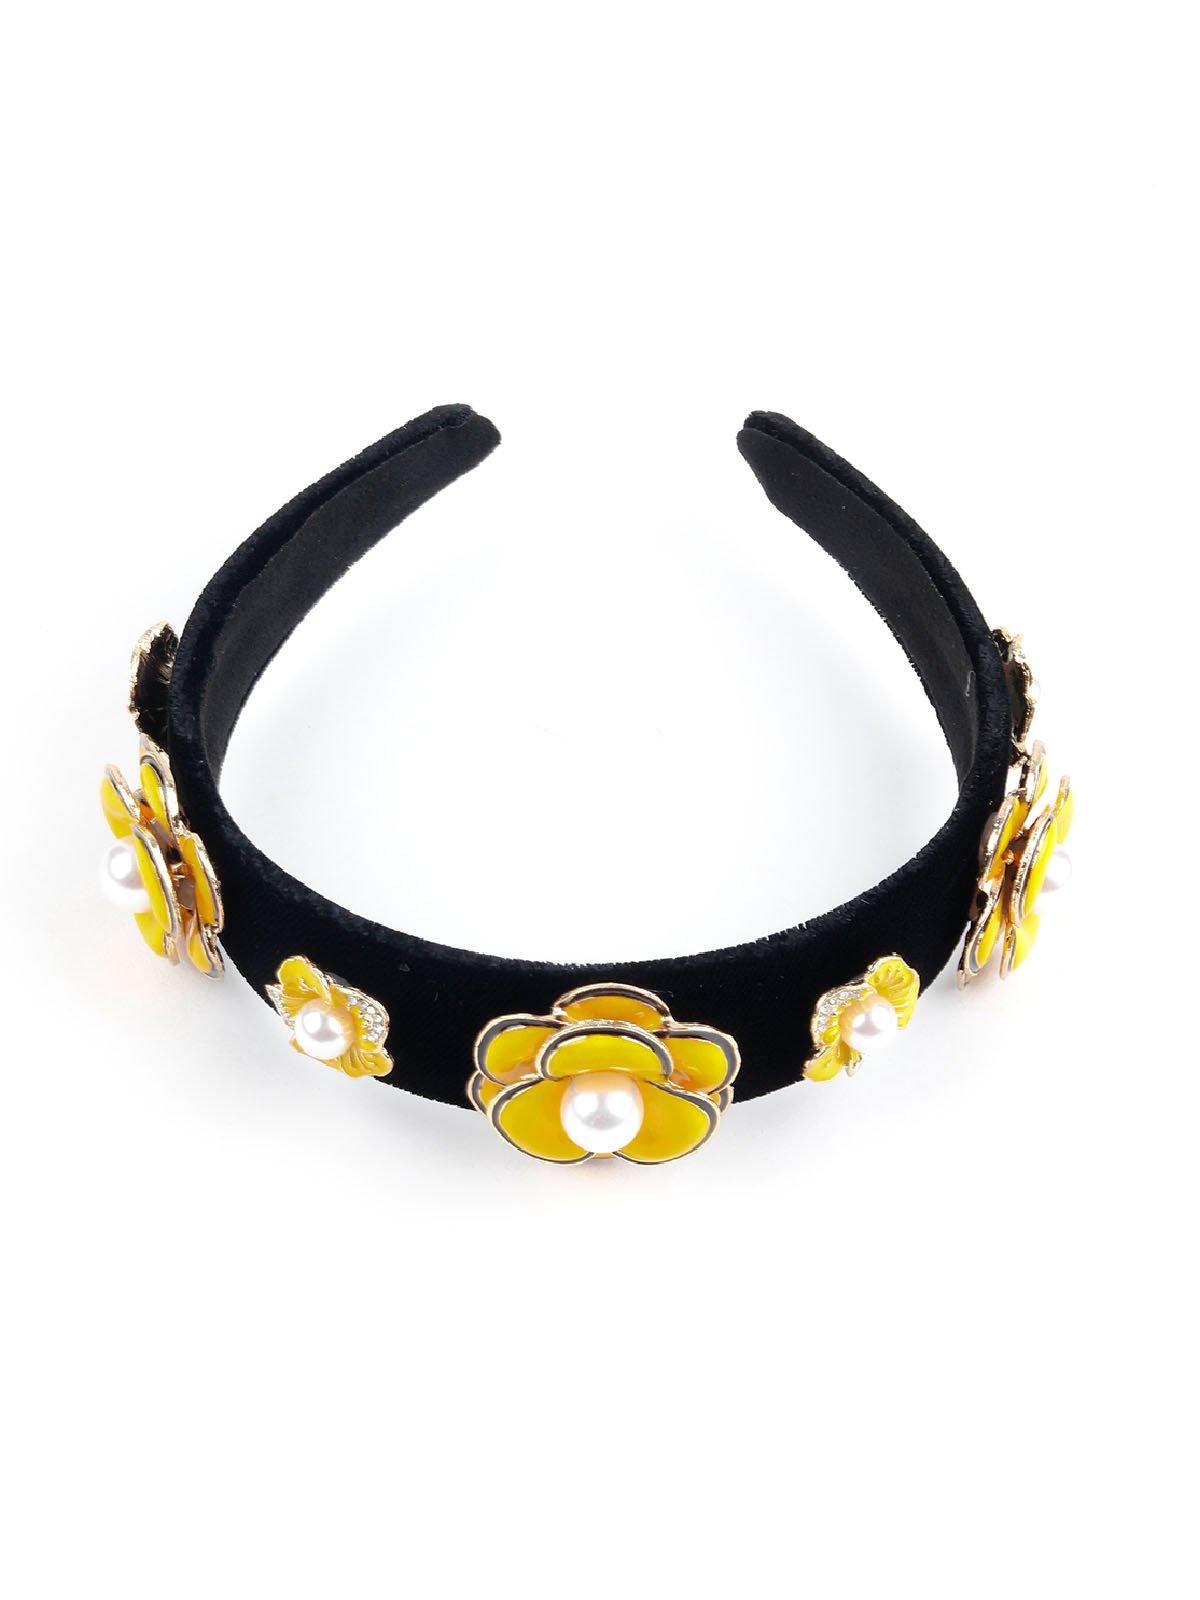 Beautiful Black Band With Floral Yellow Band - Odette